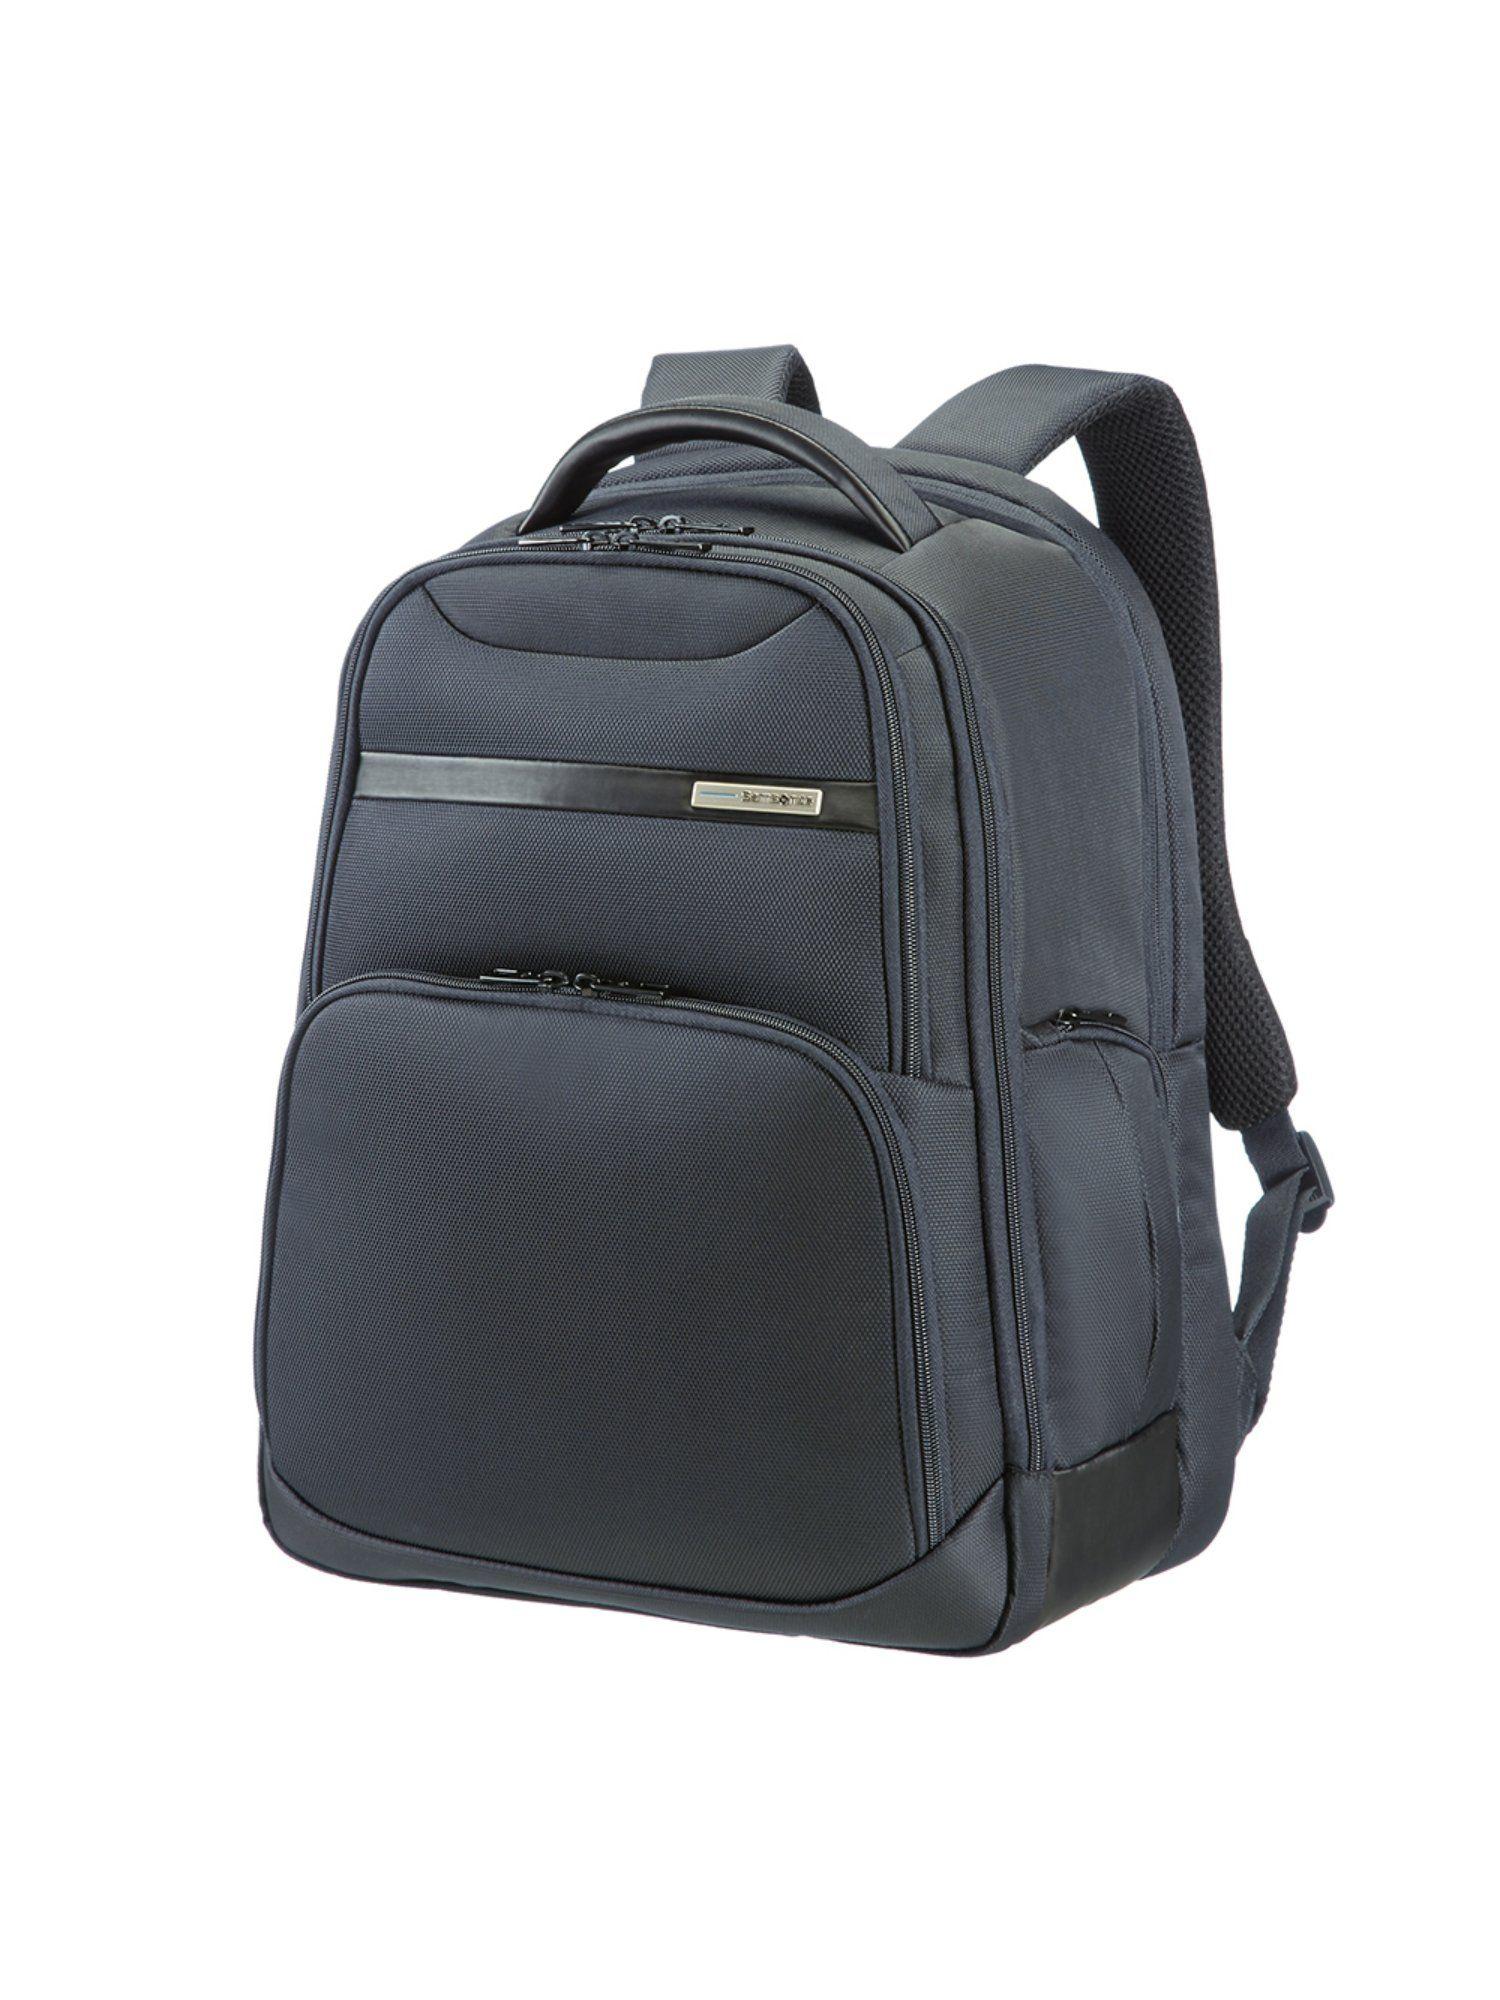 vectura laptop backpack-in-black